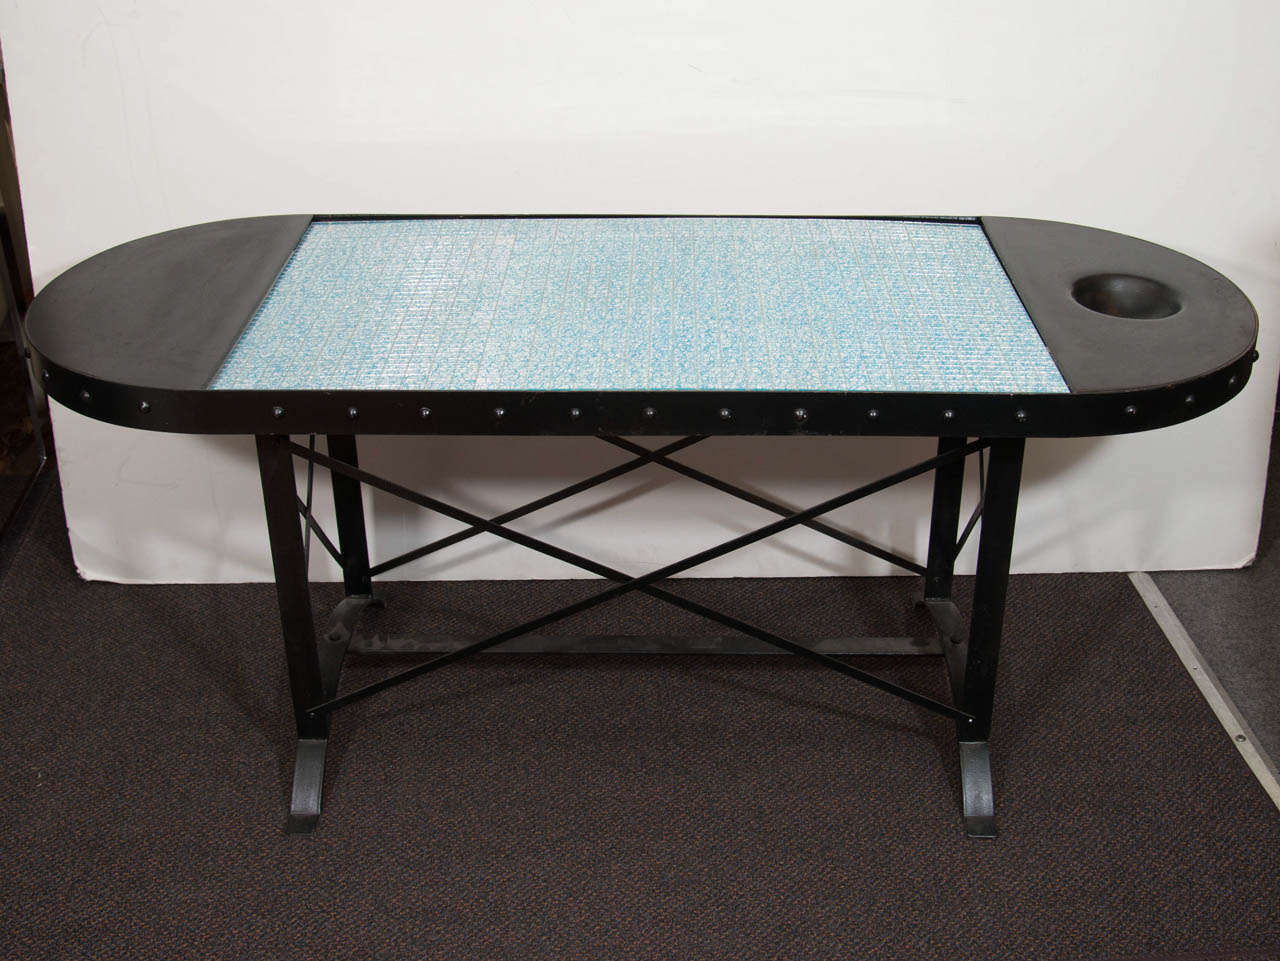 A vintage oblong shaped iron cocktail table with nail head detail.  The top is decorated with a rectangular glass section.The glass consists of smaller rectangular pieces of mirrored glass that are embellished with an applied bright blue swirl